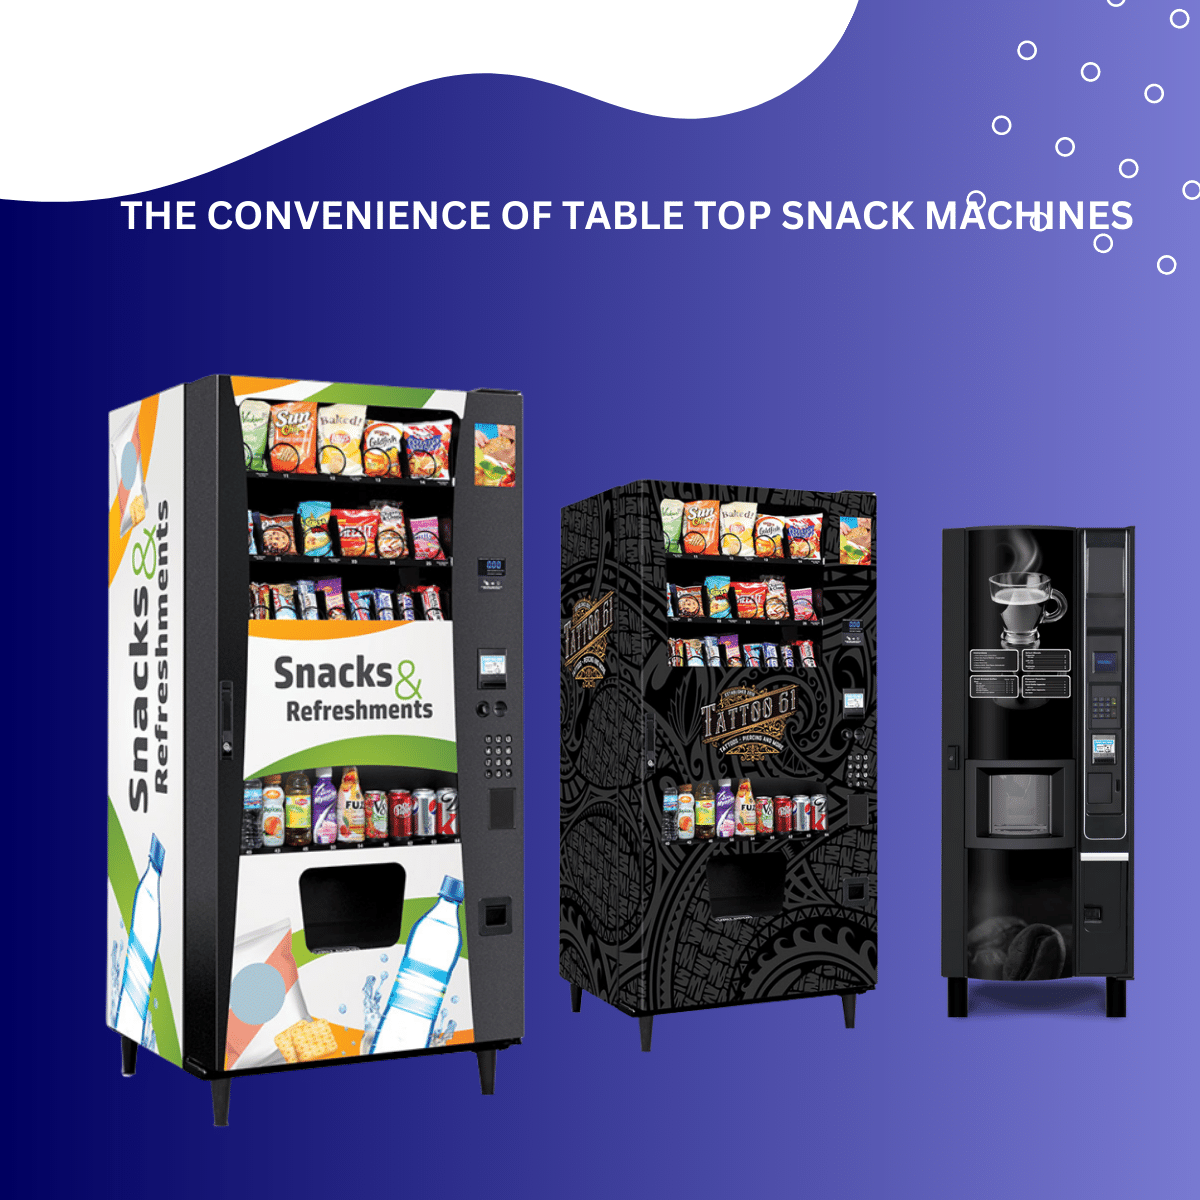 THE CONVENIENCE OF TABLE TOP SNACK MACHINES